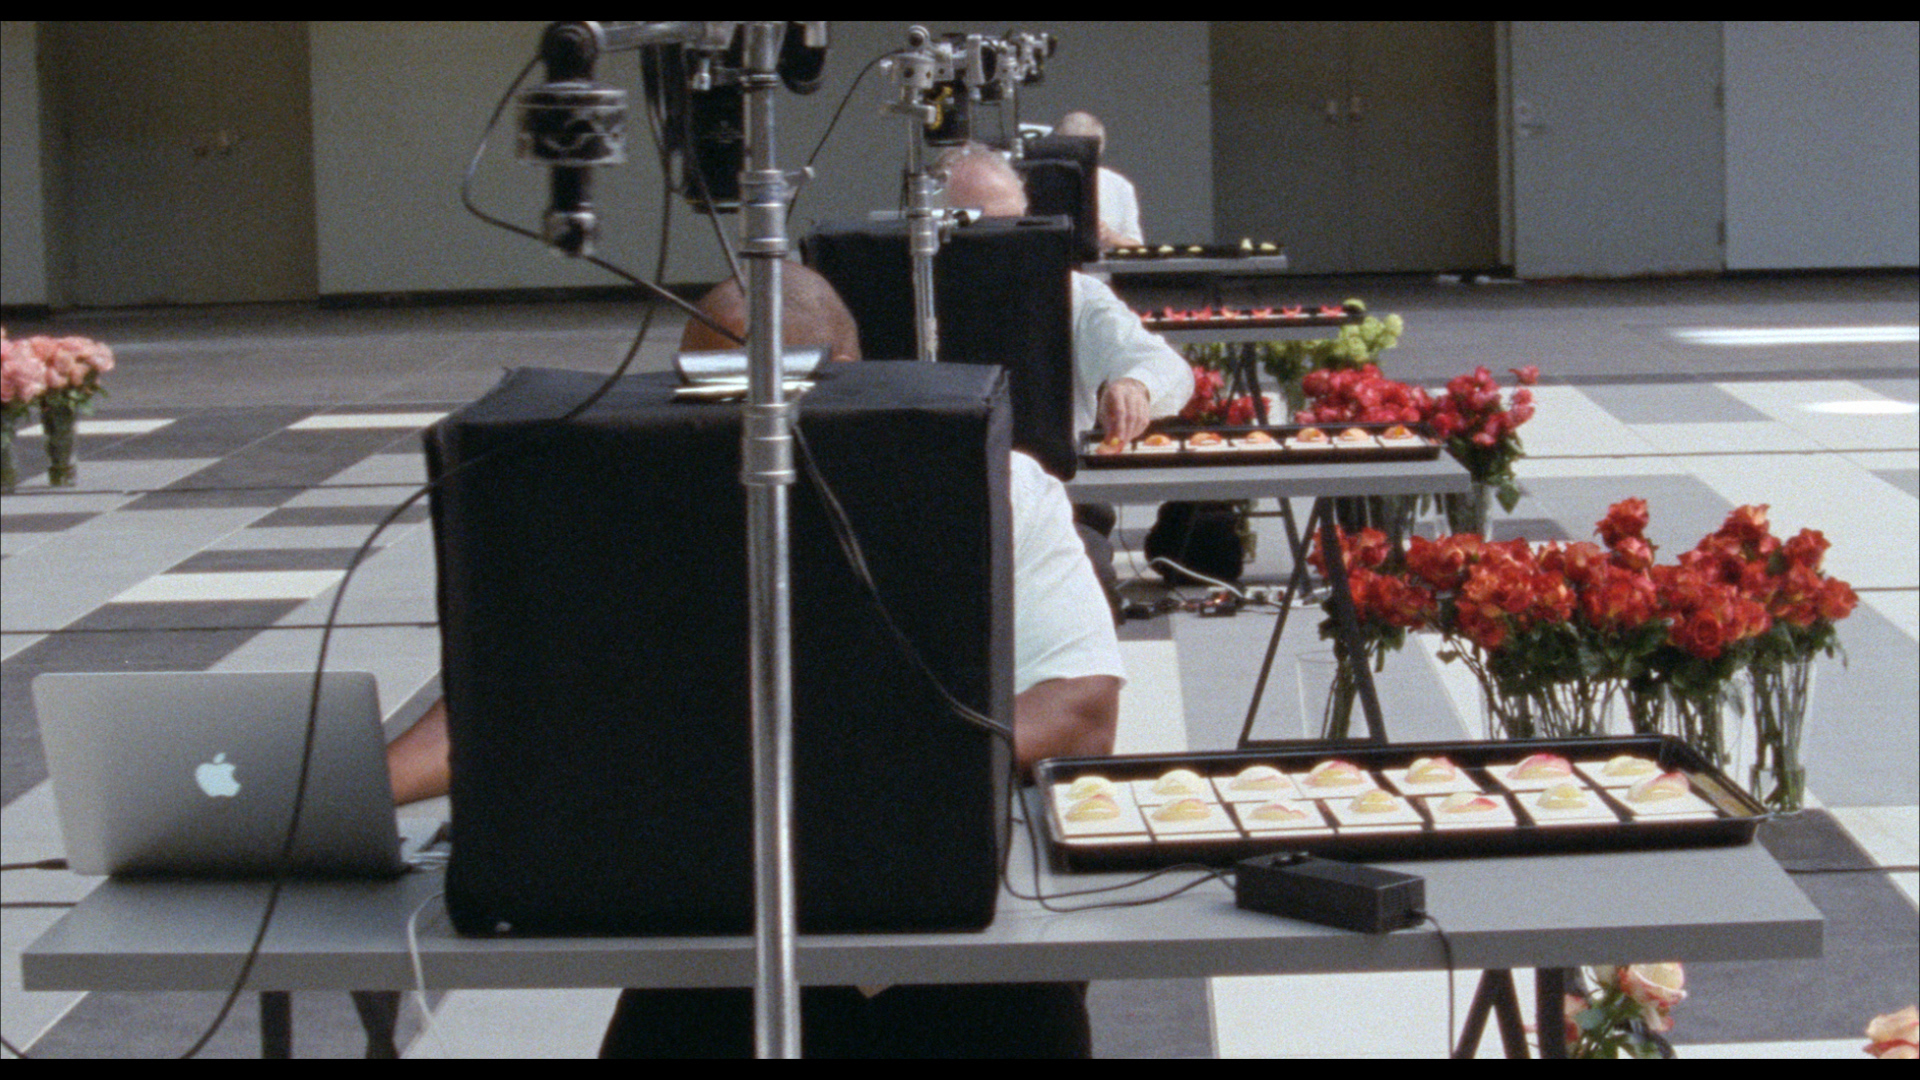 A film still showing men seated at desks with computer equipment, vases of roses, and petals laid out on sheets of paper in trays